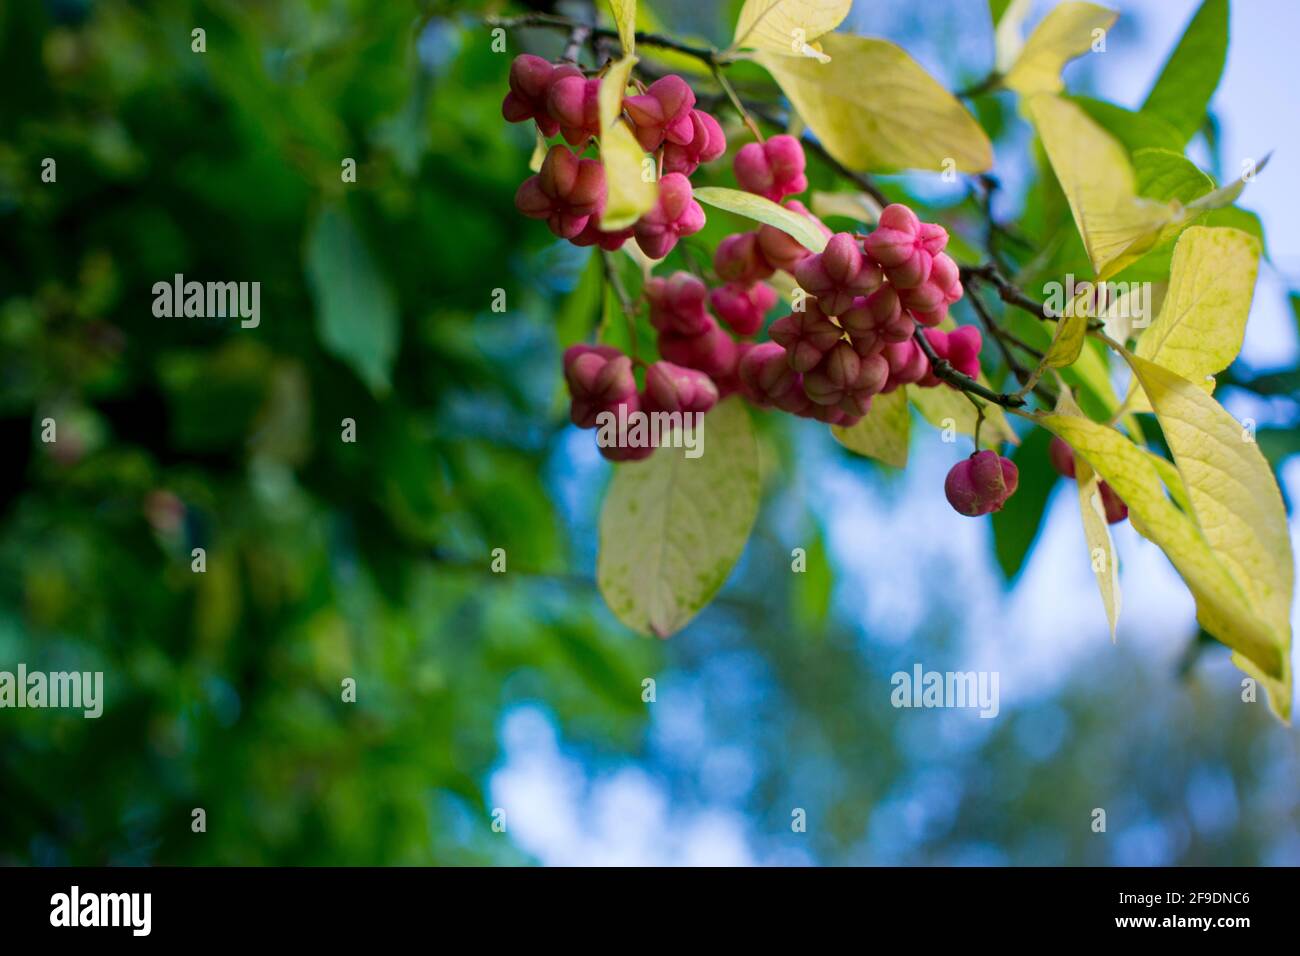 flowers of euonymus on a branch against foliage Stock Photo